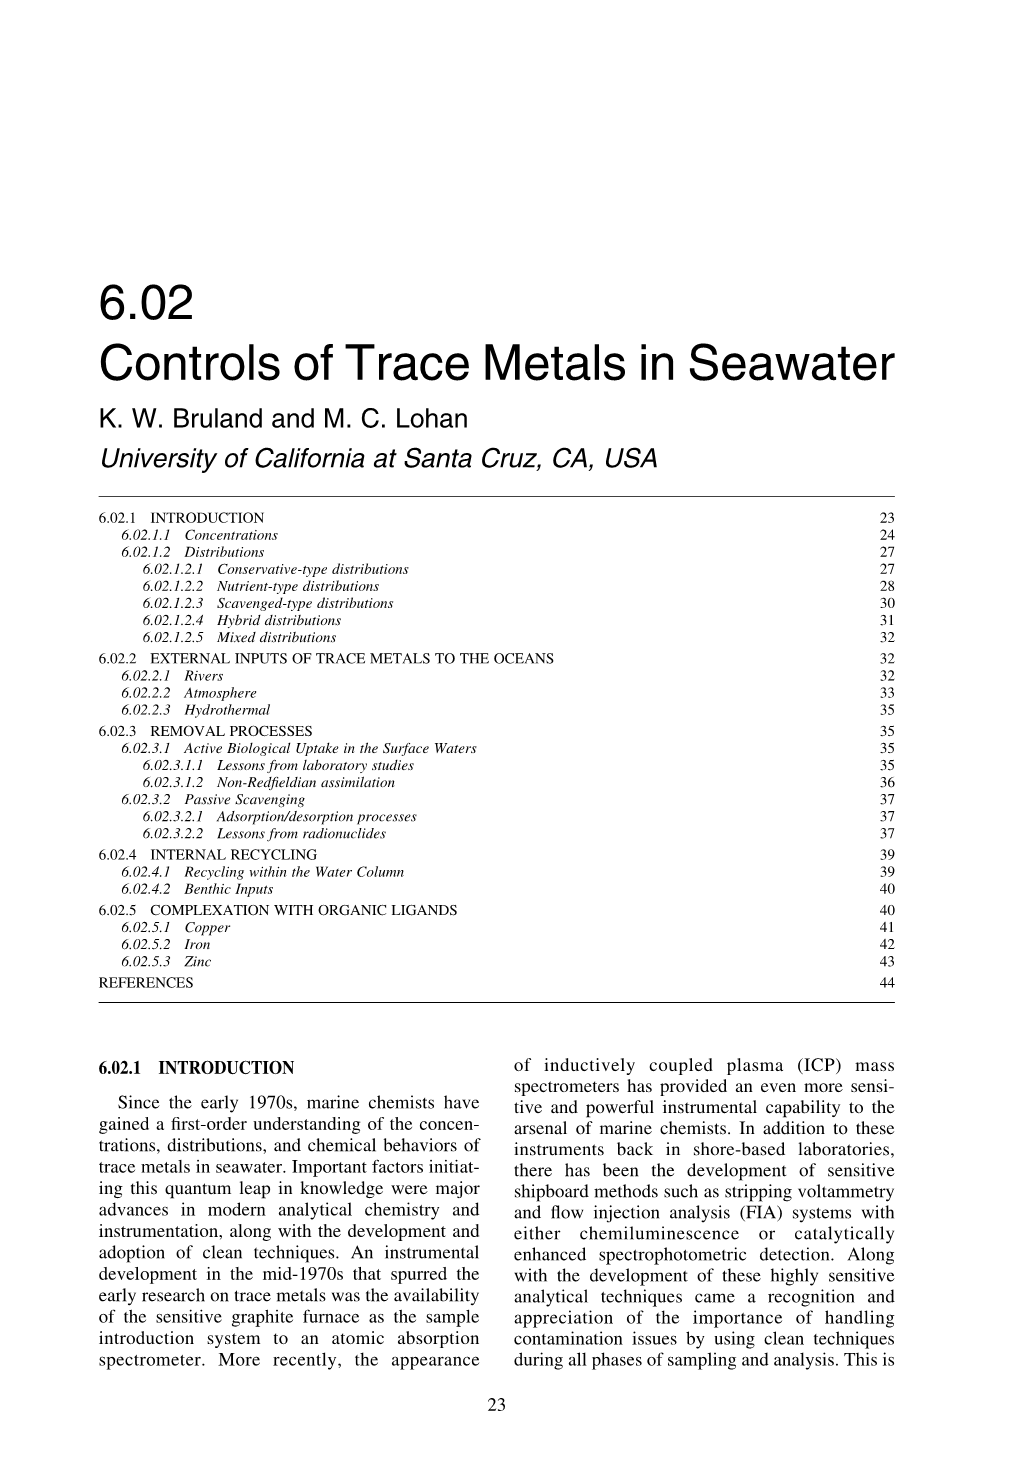 Controls of Trace Metals in Seawater. In